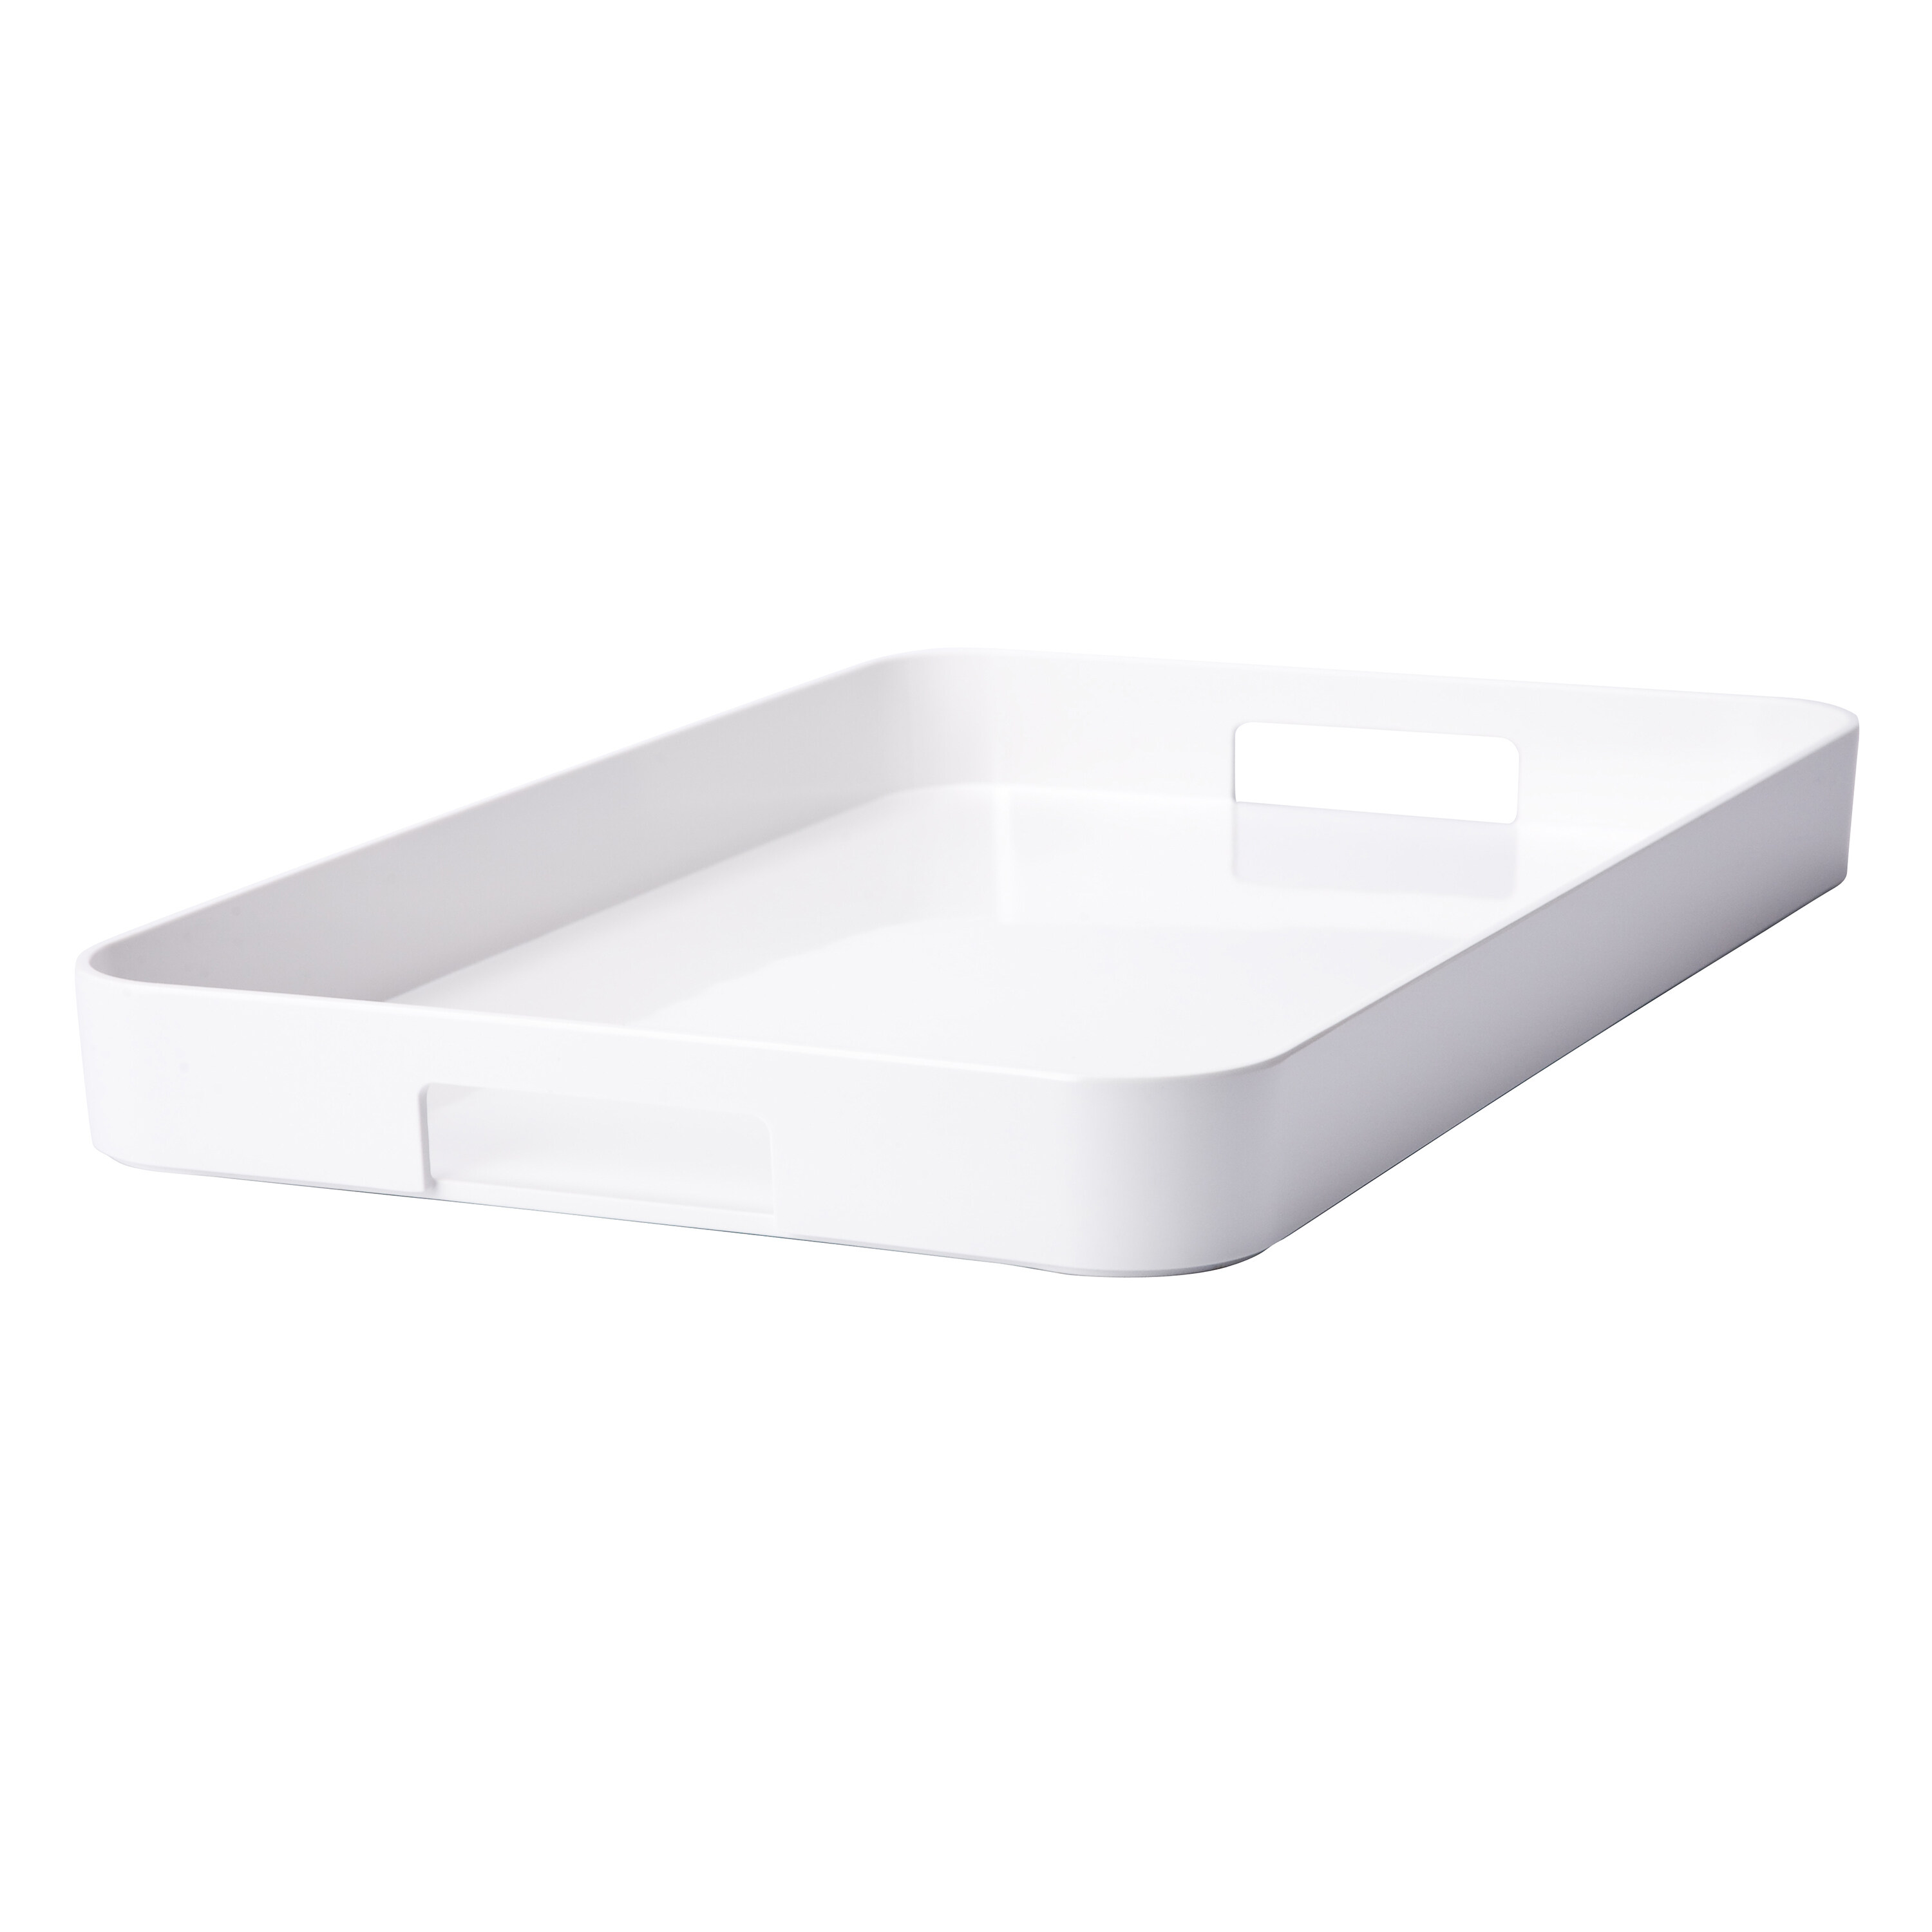 Details about   Zak Designs Durable Melamine Plastic Rectangle Serving Tray with Large Handles 